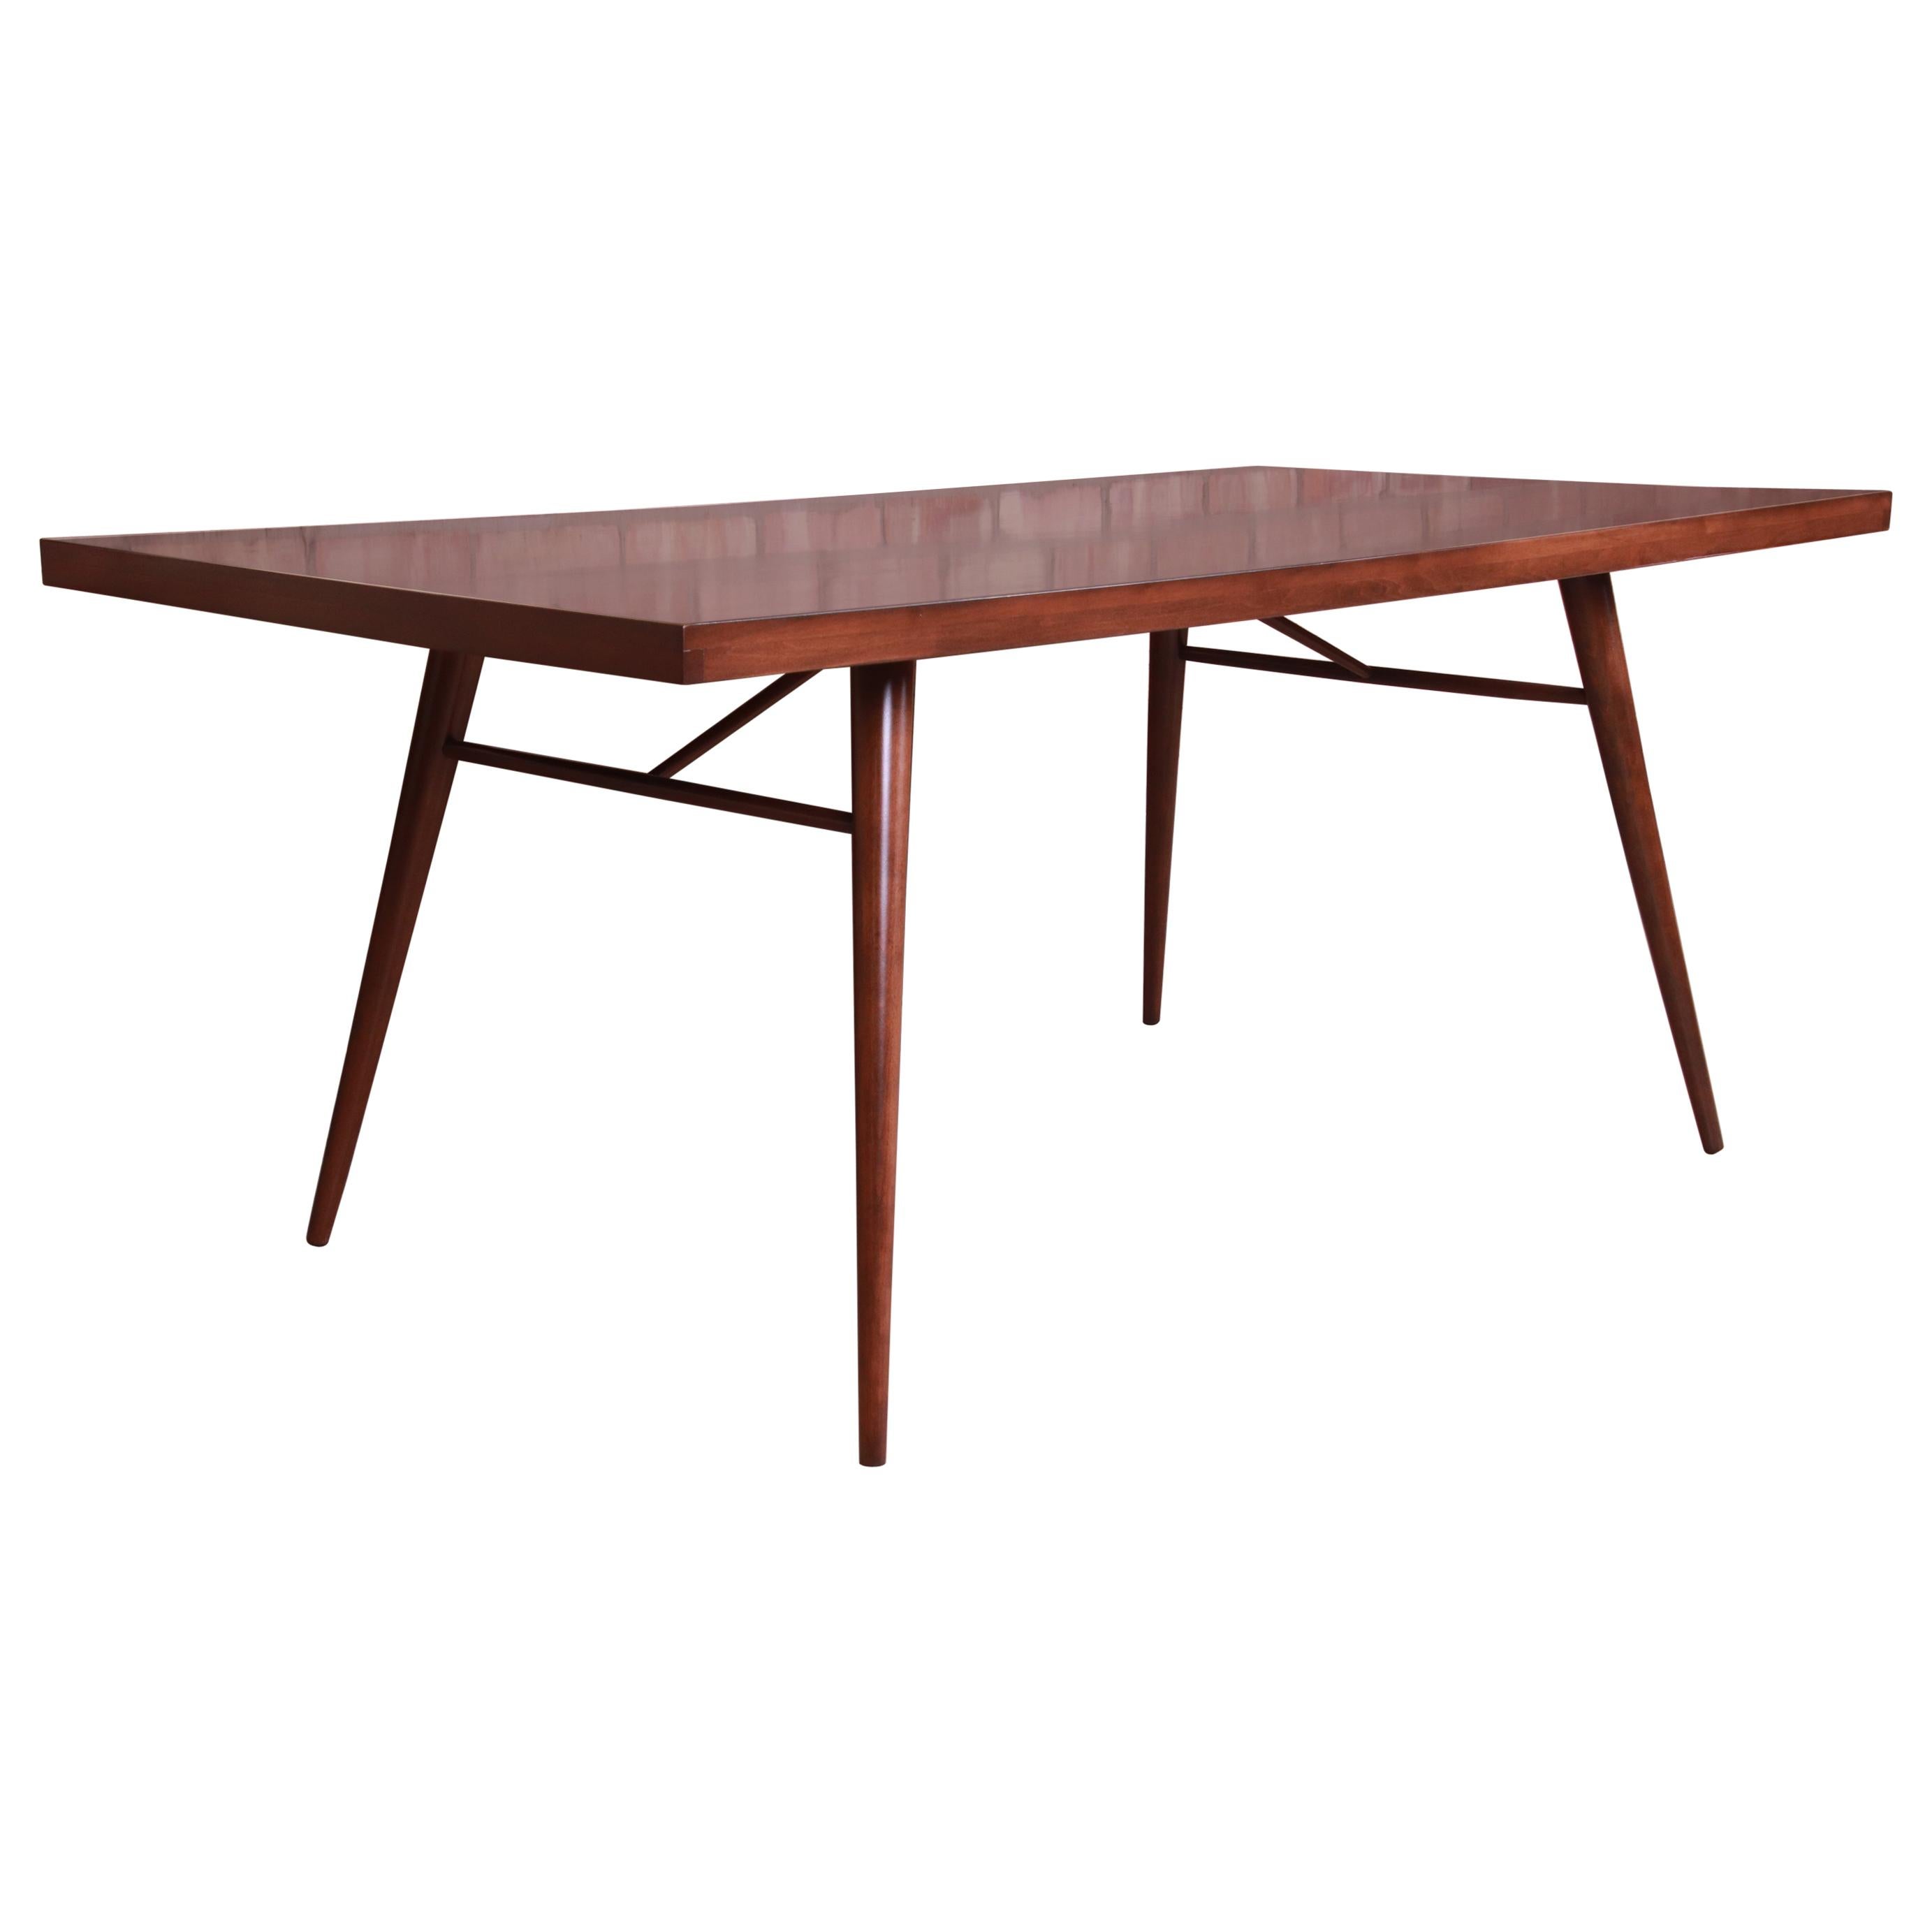 Paul McCobb Planner Group Mid-Century Modern Birch Dining Table, Refinished